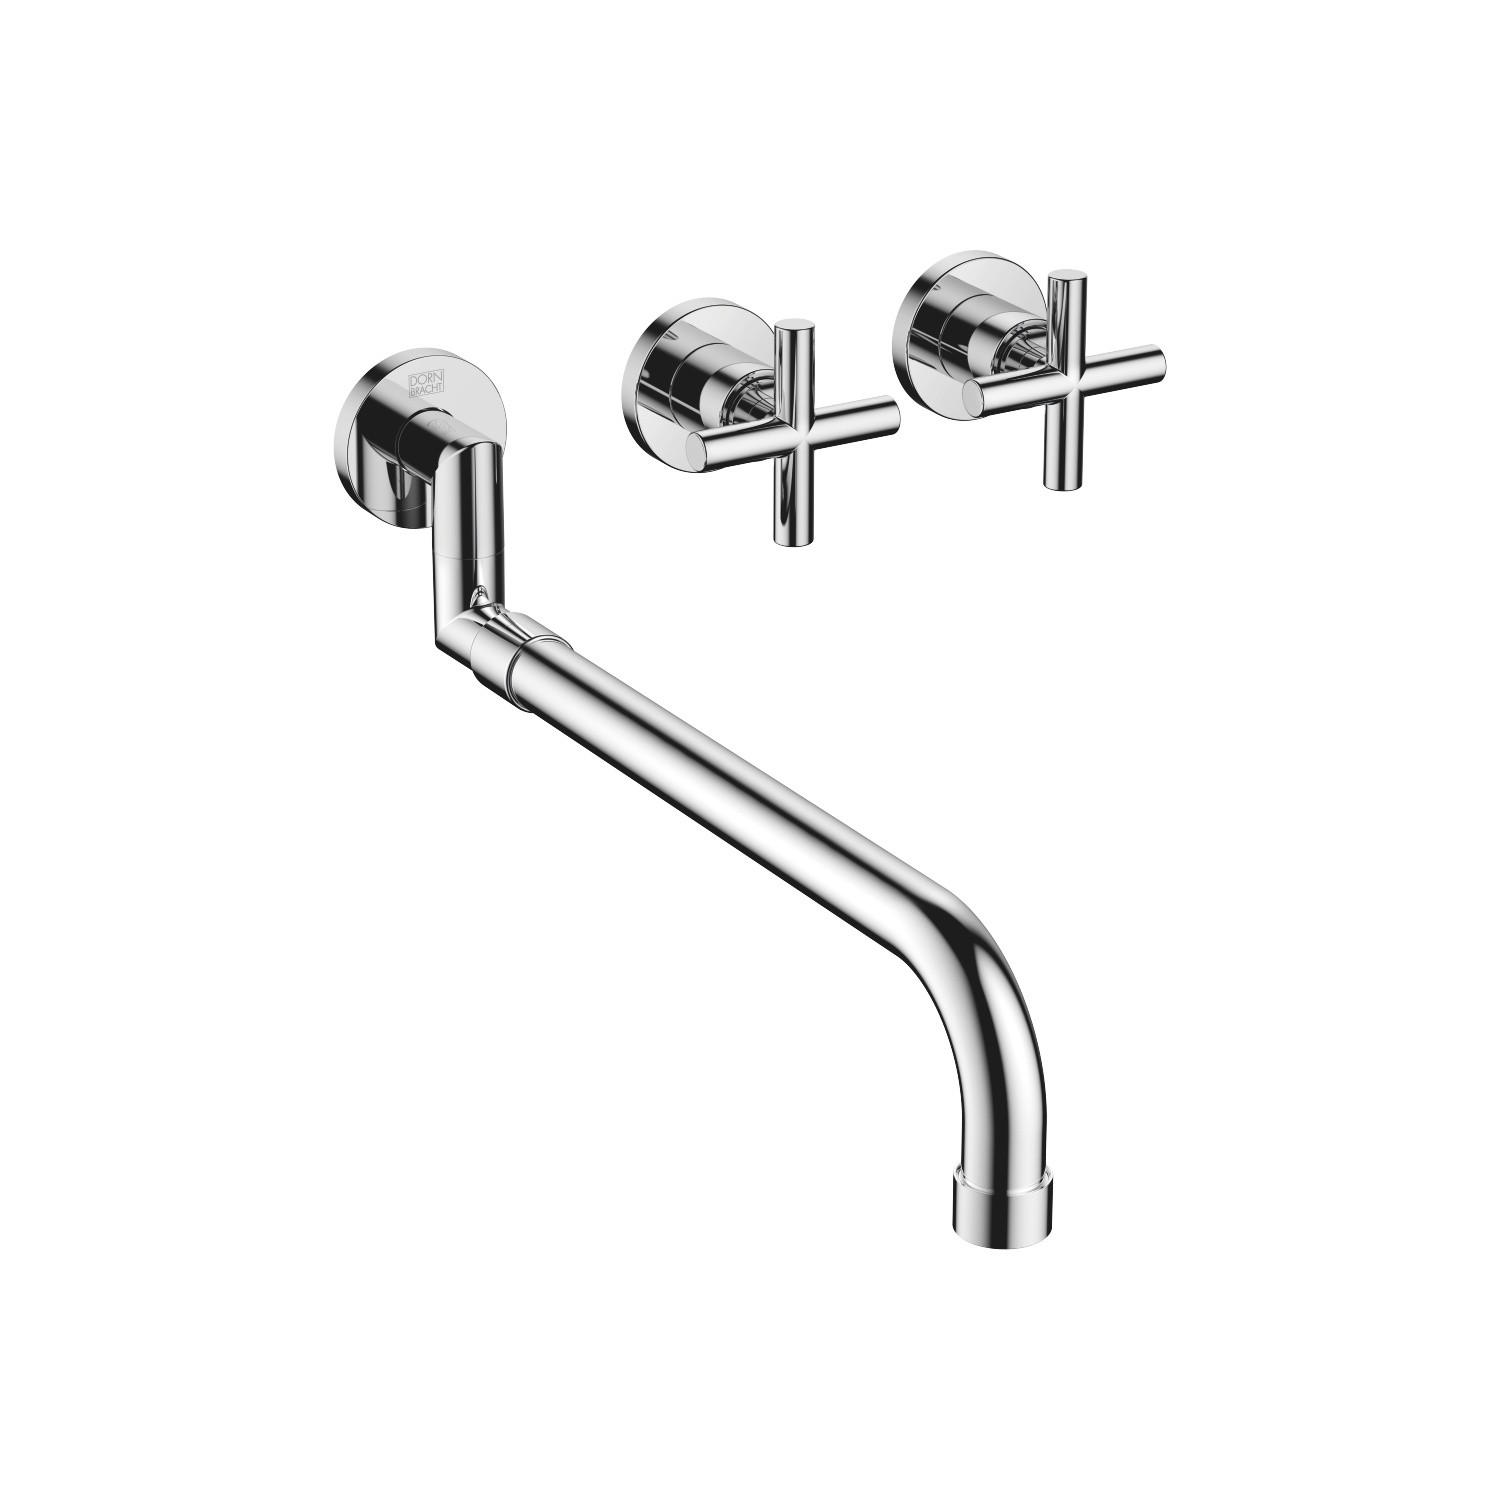 DORNBRACHT 36819892-0010 TARA THREE HOLES WALL MOUNT WIDESPREAD KITCHEN FAUCET WITH PULL OUT SPOUT